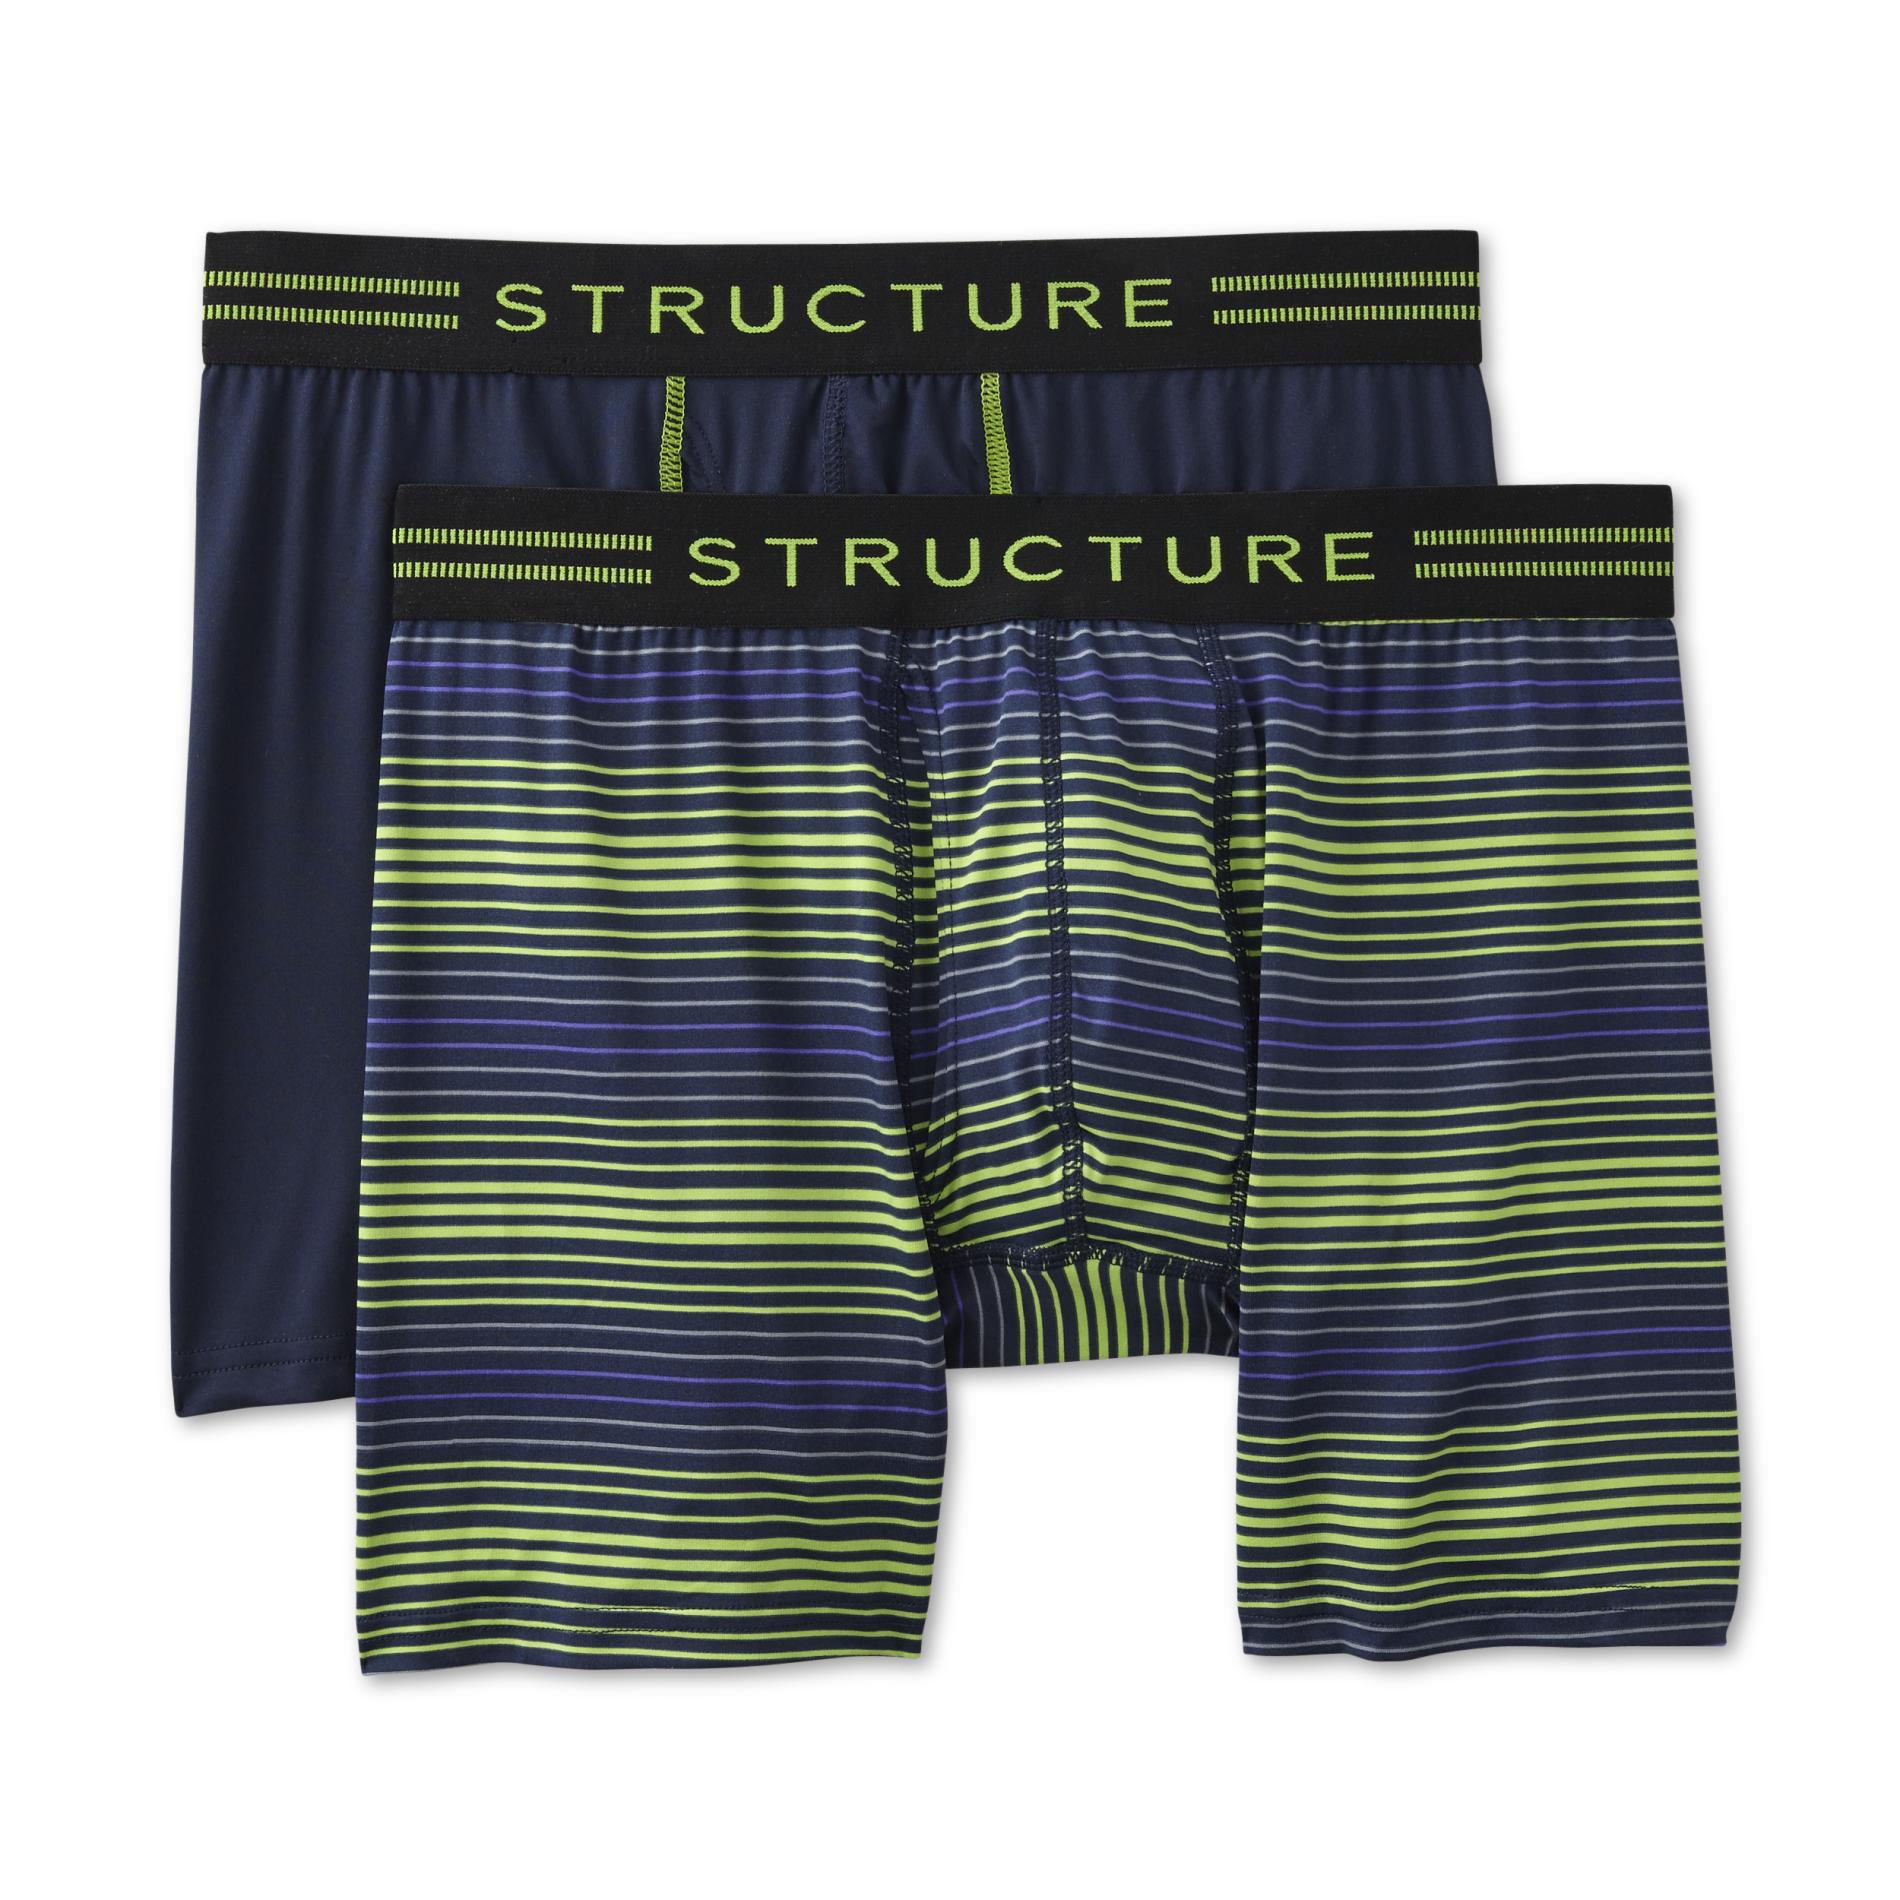 Structure Men's 2-Pack Performance Sport Boxer Briefs - Solid & Striped